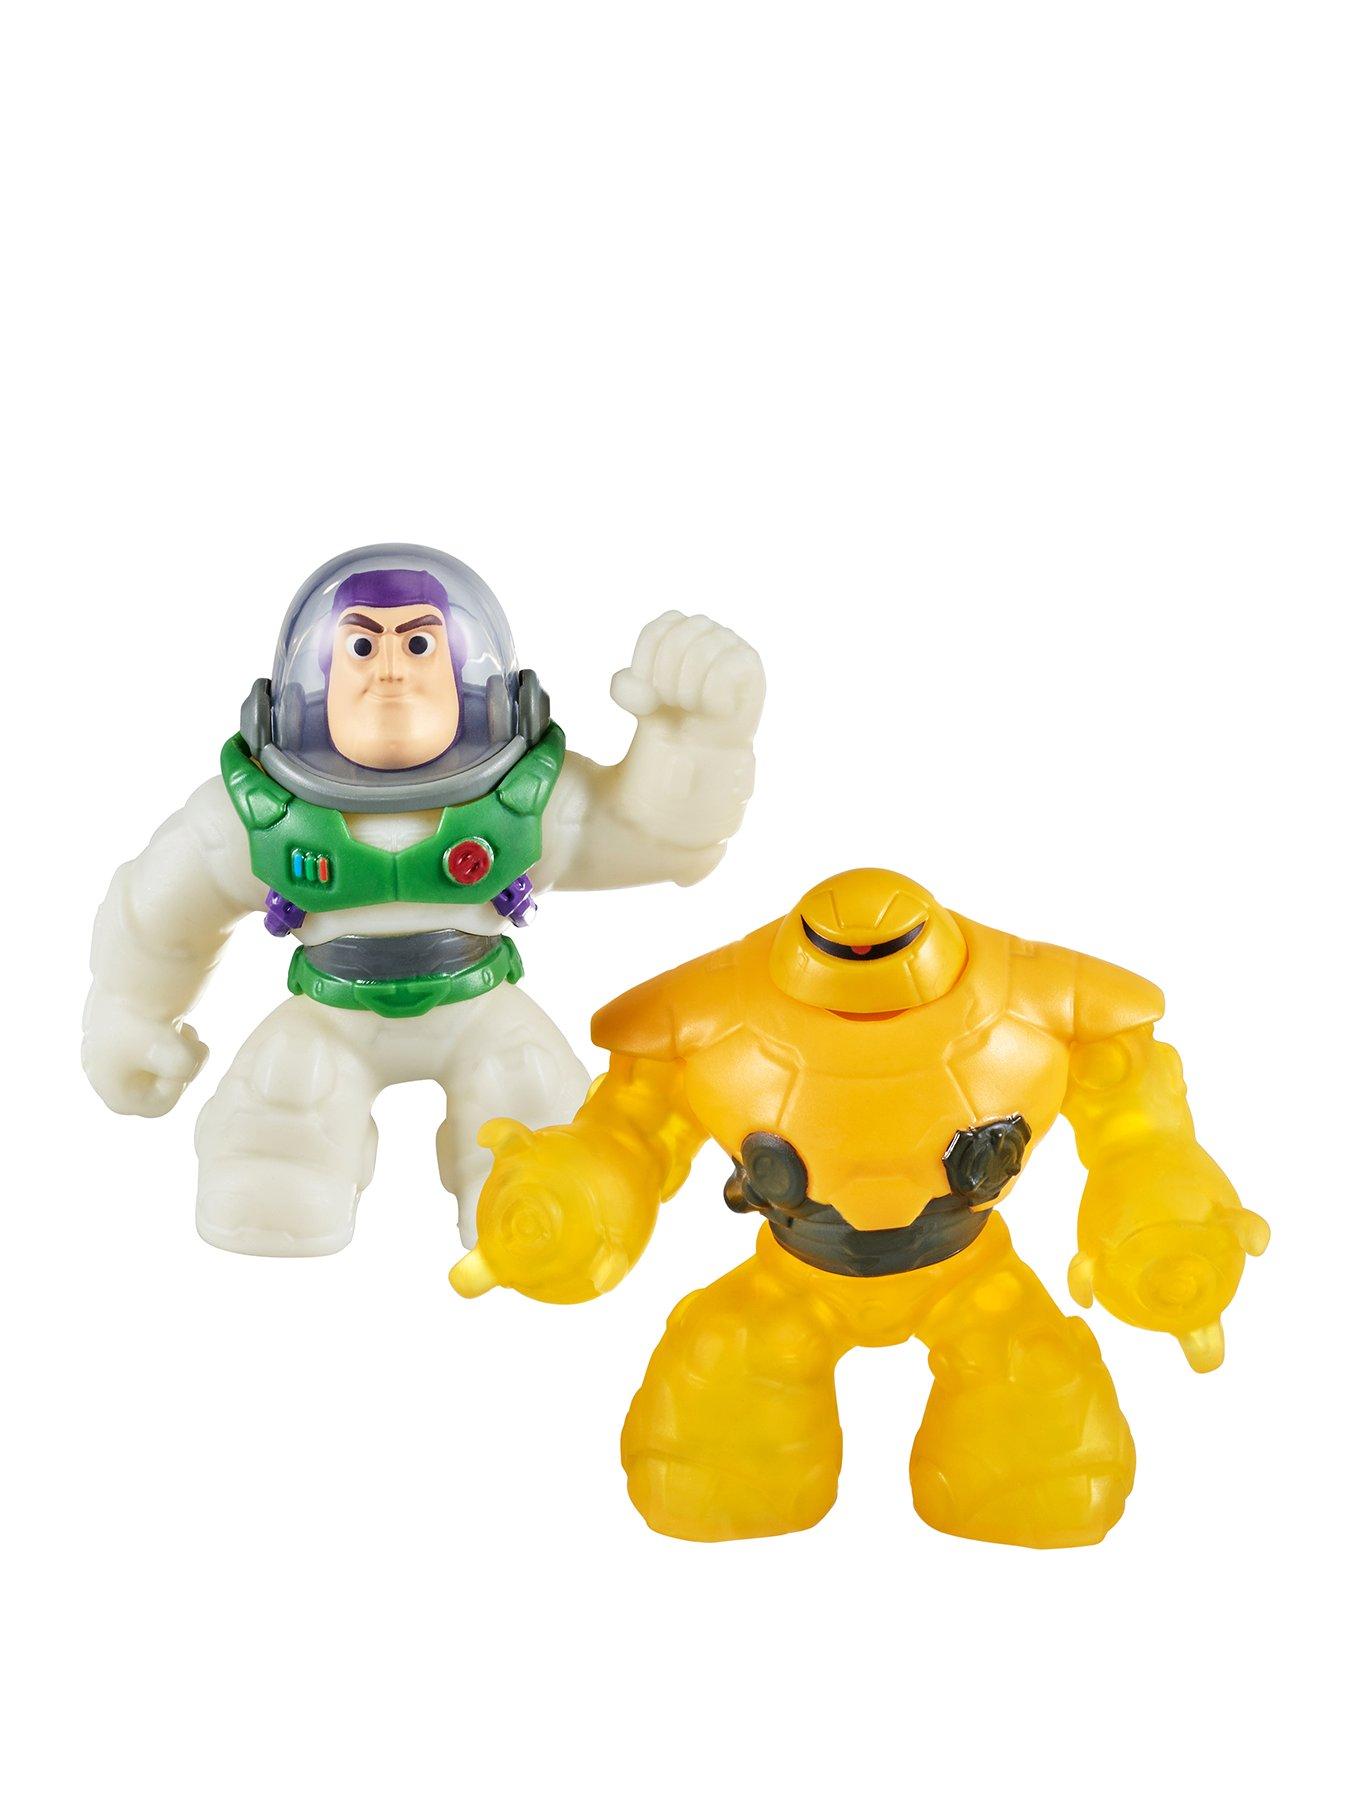 Details about   LITTLE FIGZ CITY HEROES STRETCH FIGURINES SERIES 1 